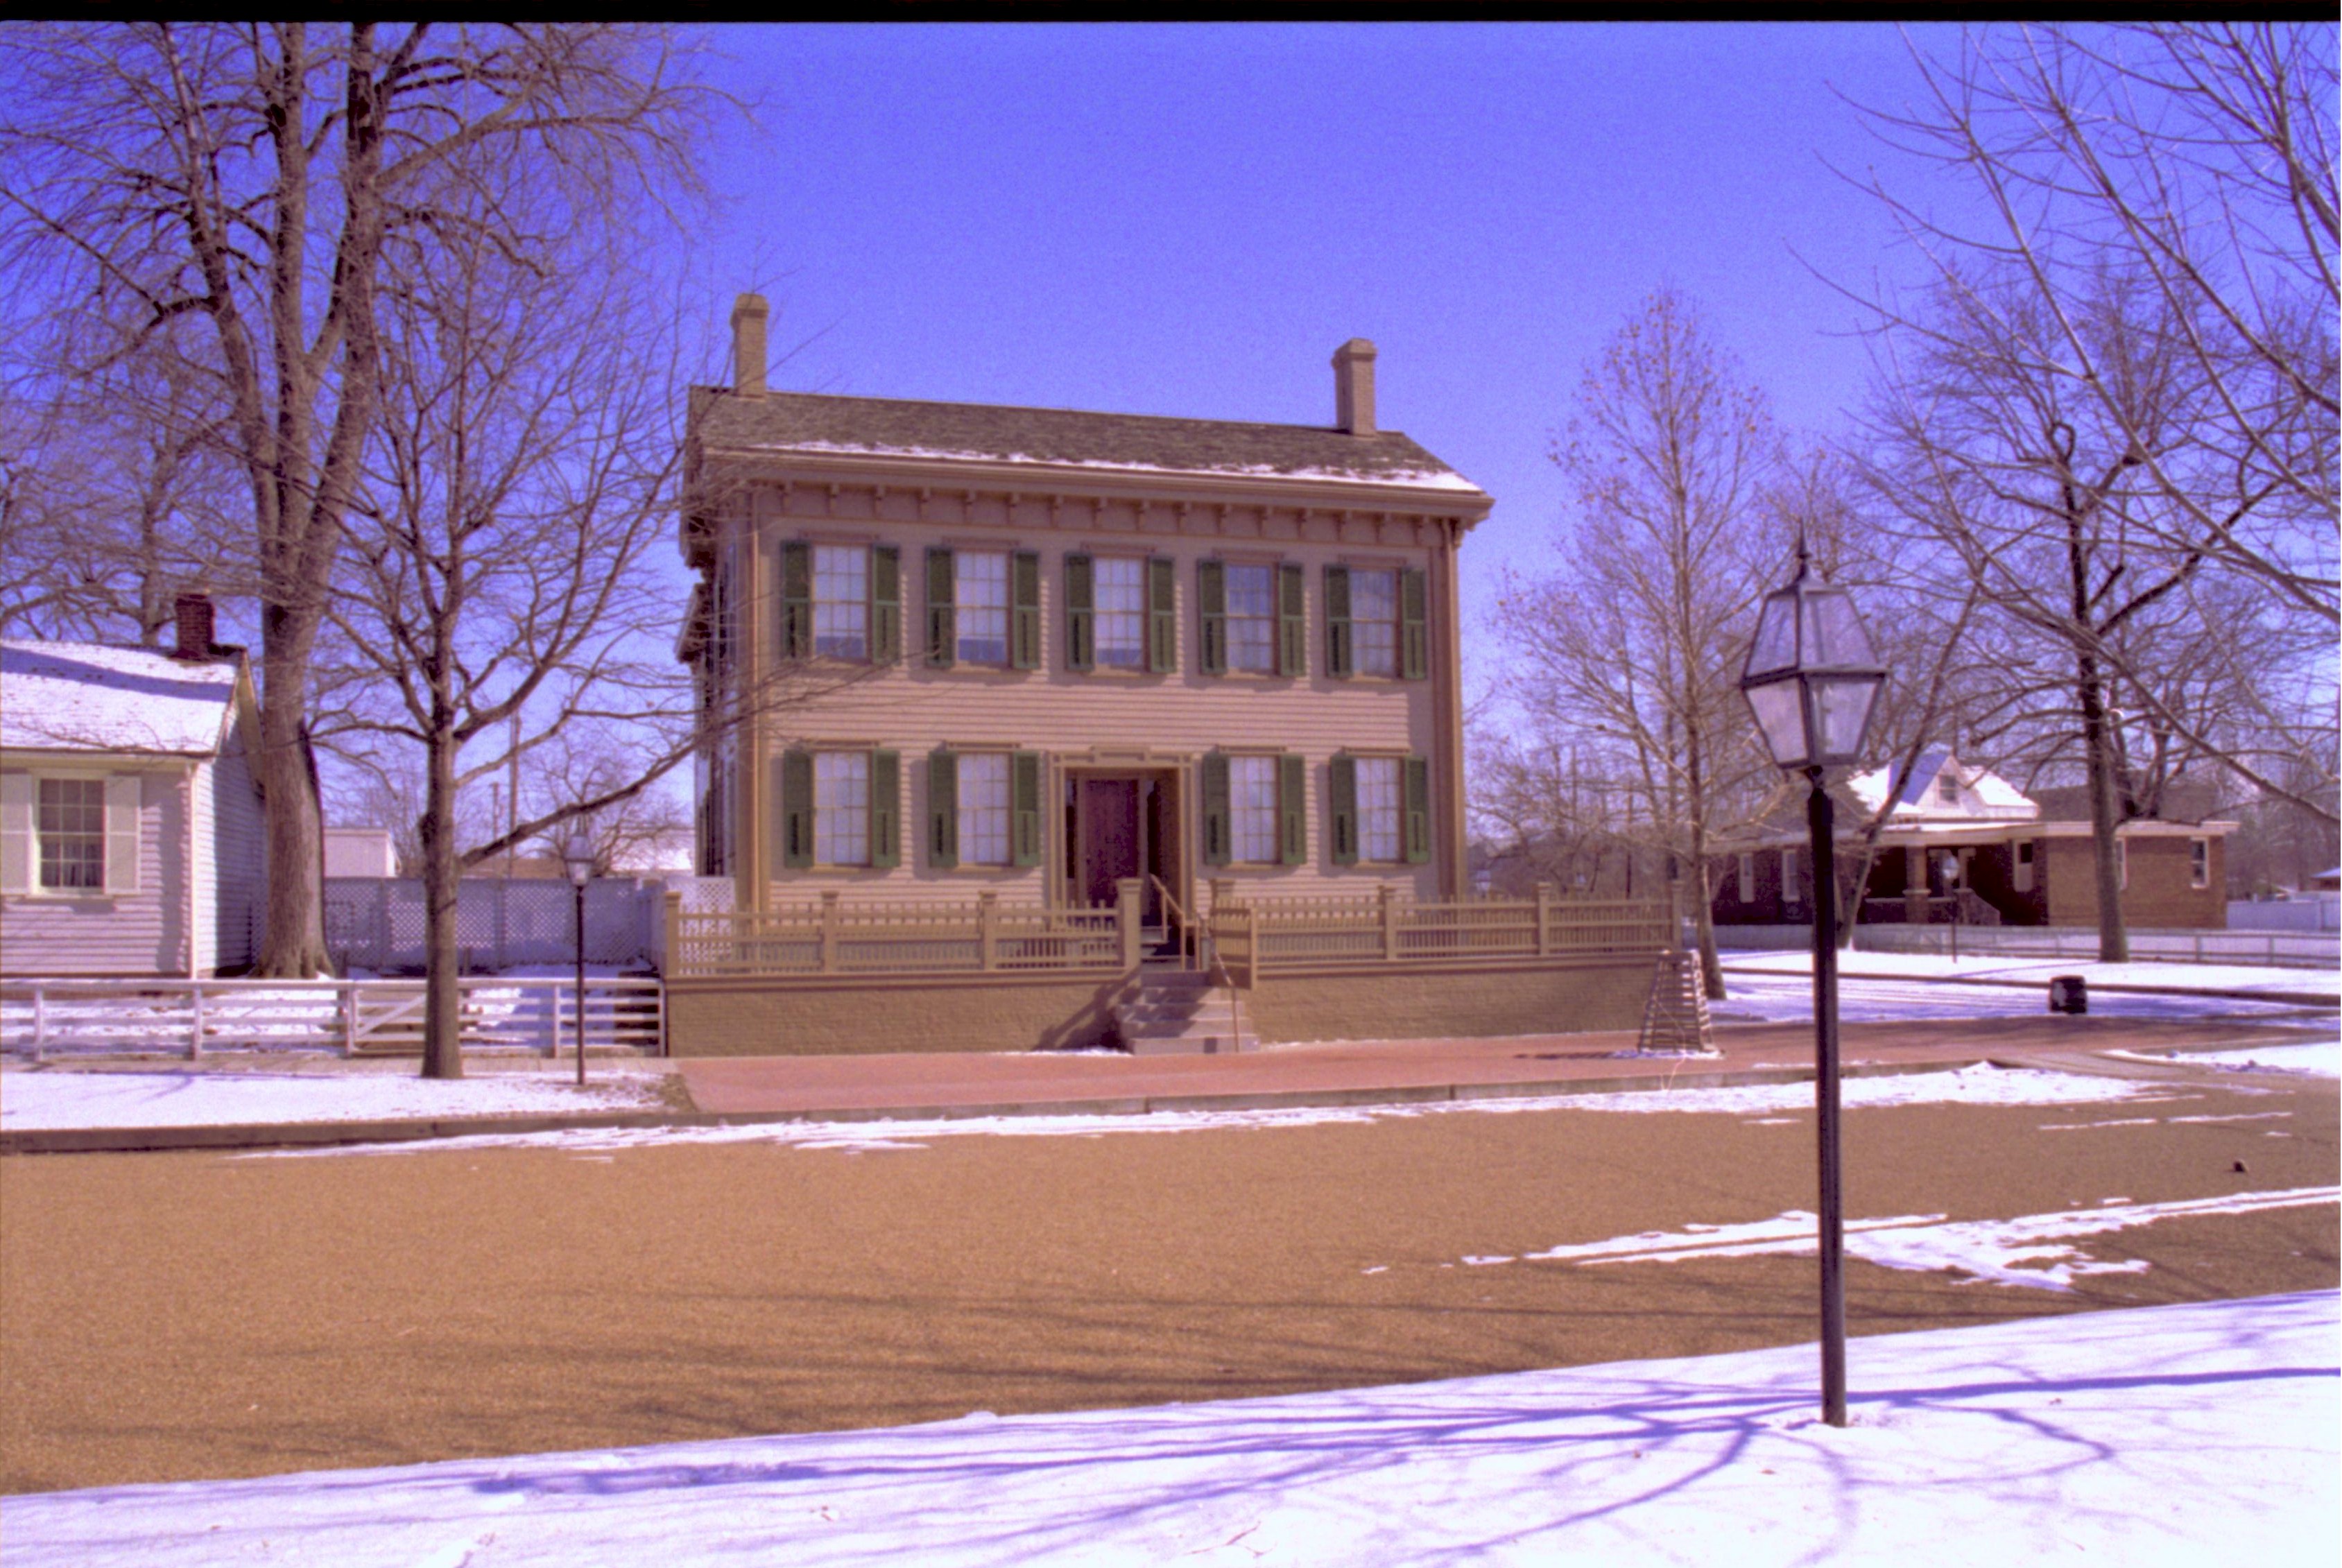 Lincoln Home in winter, snow scattered throughout. Cleared brick plaza in front, elm tree in cage on right. Corneau House on left, Arnold House in backgroun on right Looking East/Southeast from boardwalk west of 8th Street snow, Lincoln Home, Corneau, Arnold House, 8th Street, brick plaza, elm tree